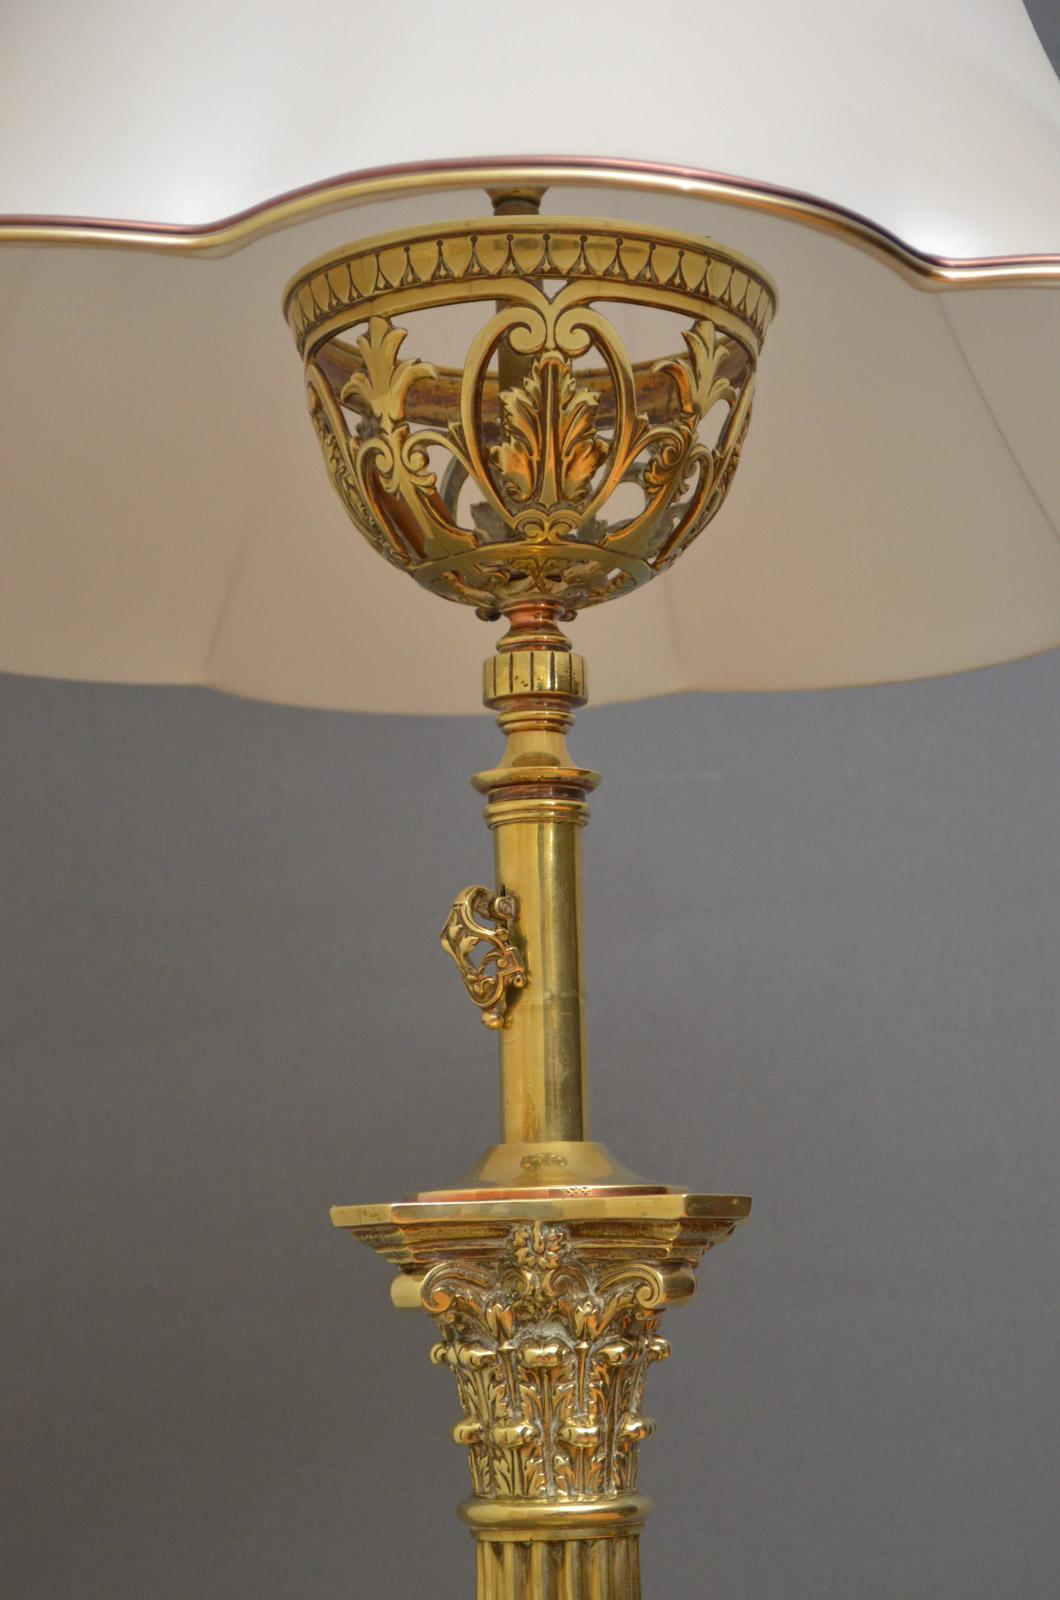 Sn4460 Victorian brass, height adjustable, standard lamp, having fluted Corinthian column, stepped base and paw feet. This antique lamp has been pat tested and is ready to place at home. Lampshade not included, circa 1880
Measures: H 59-79